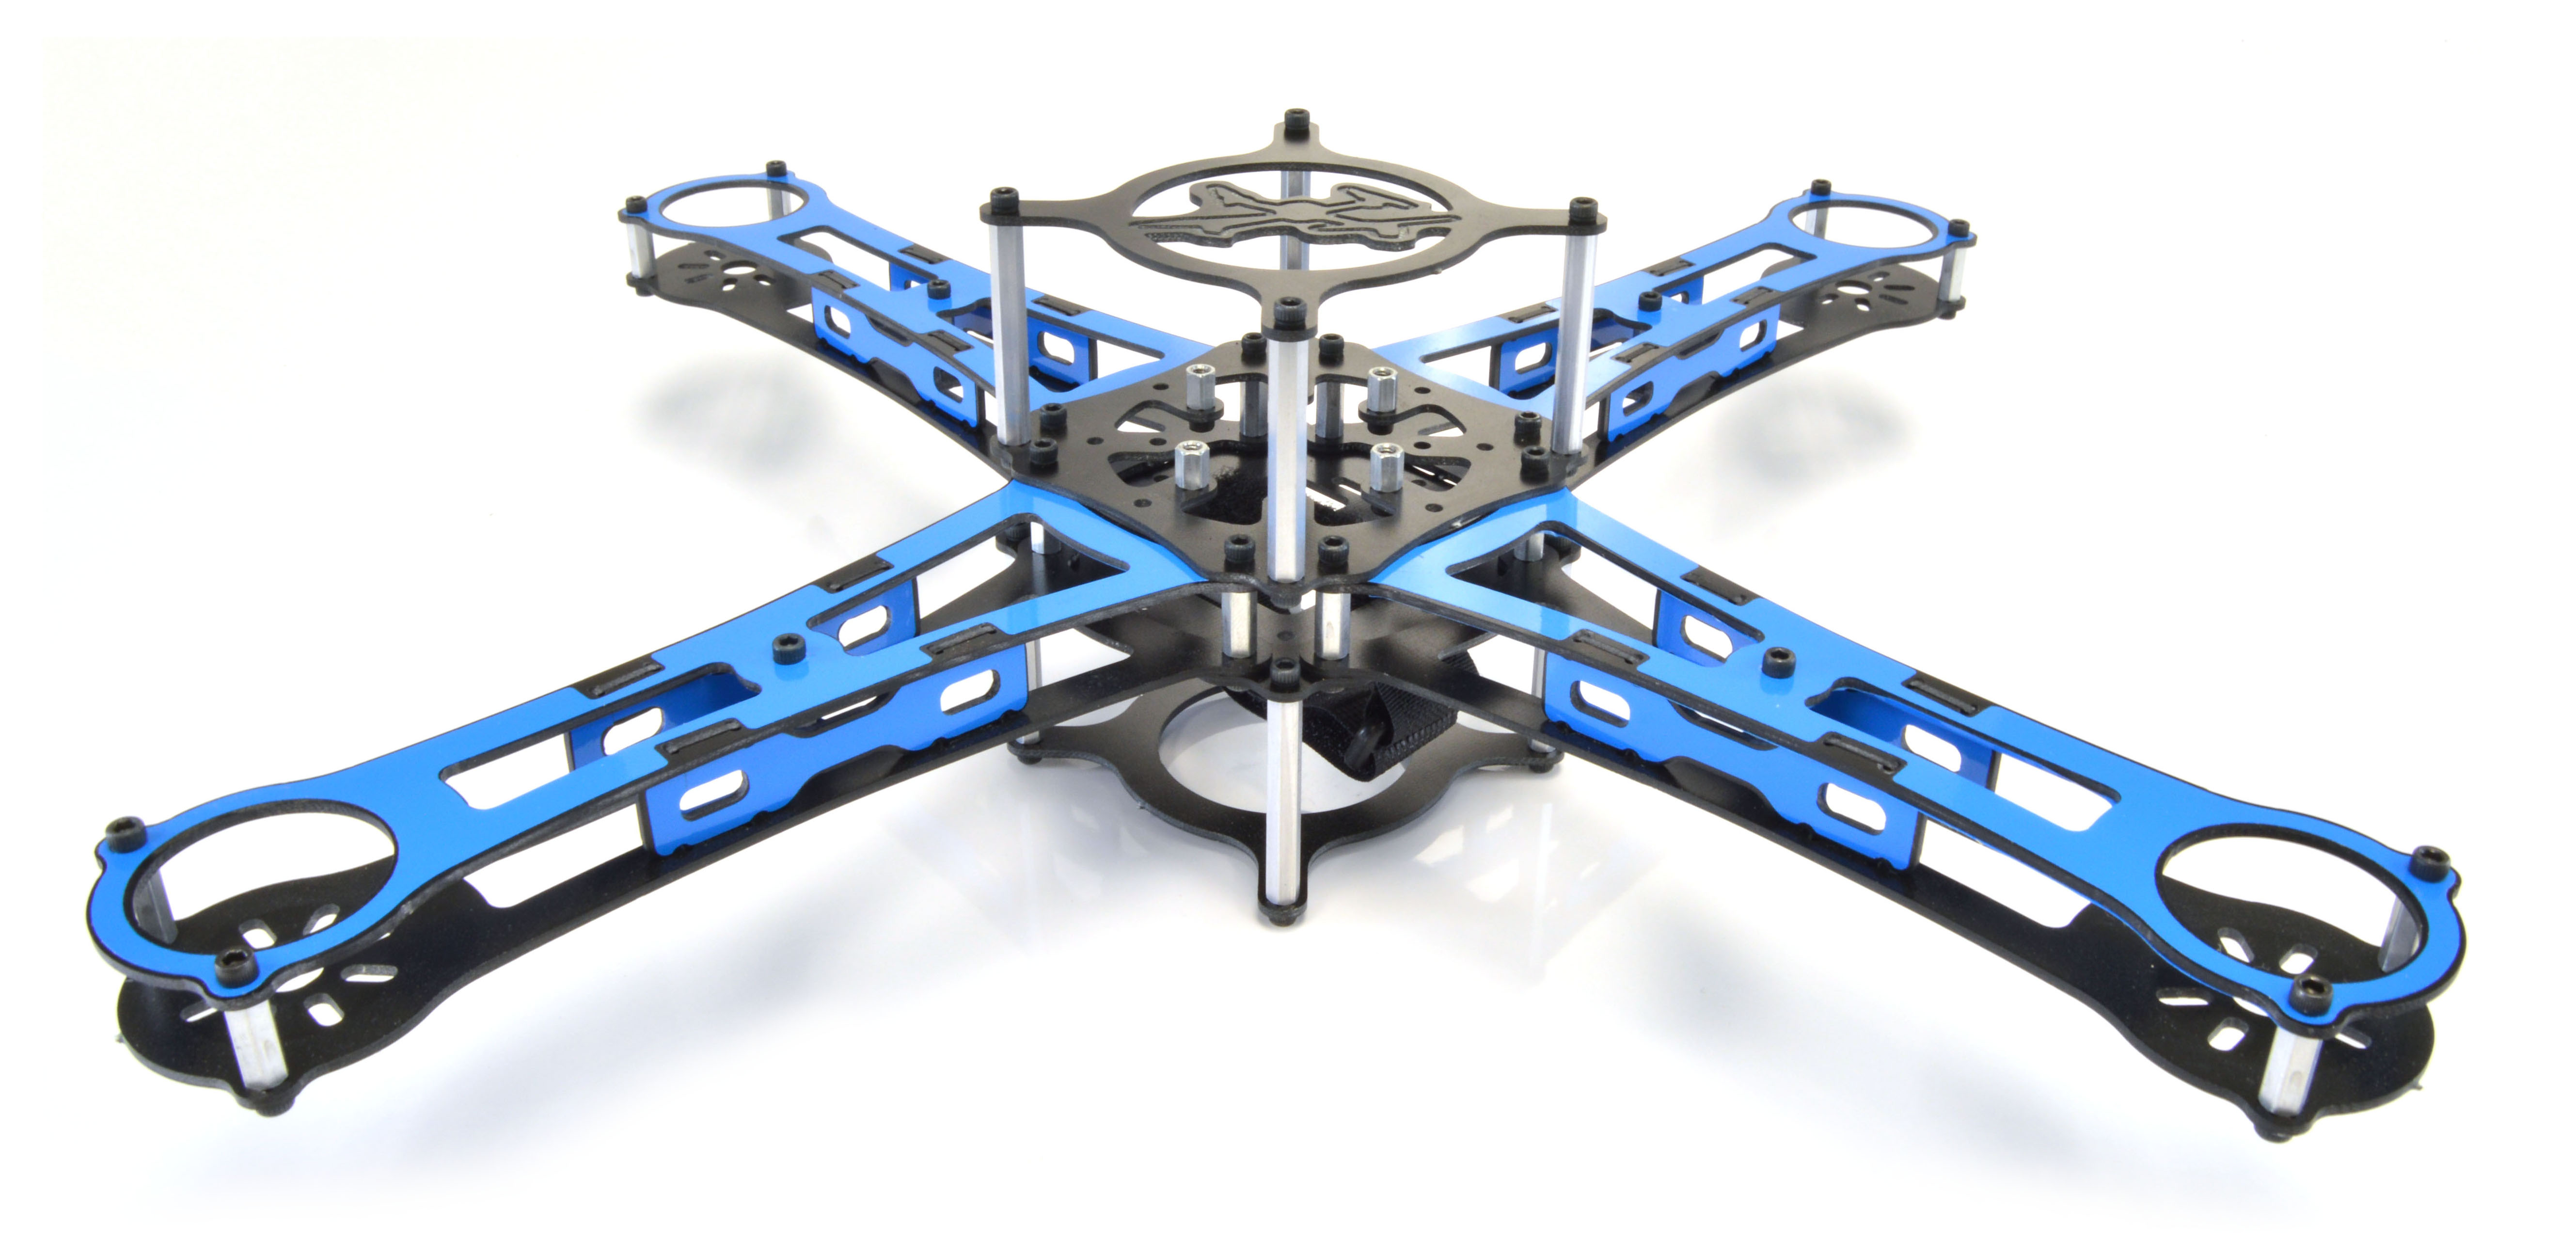 Lynxmotion Crazy2Fly Drone Kit (alleen hardware)